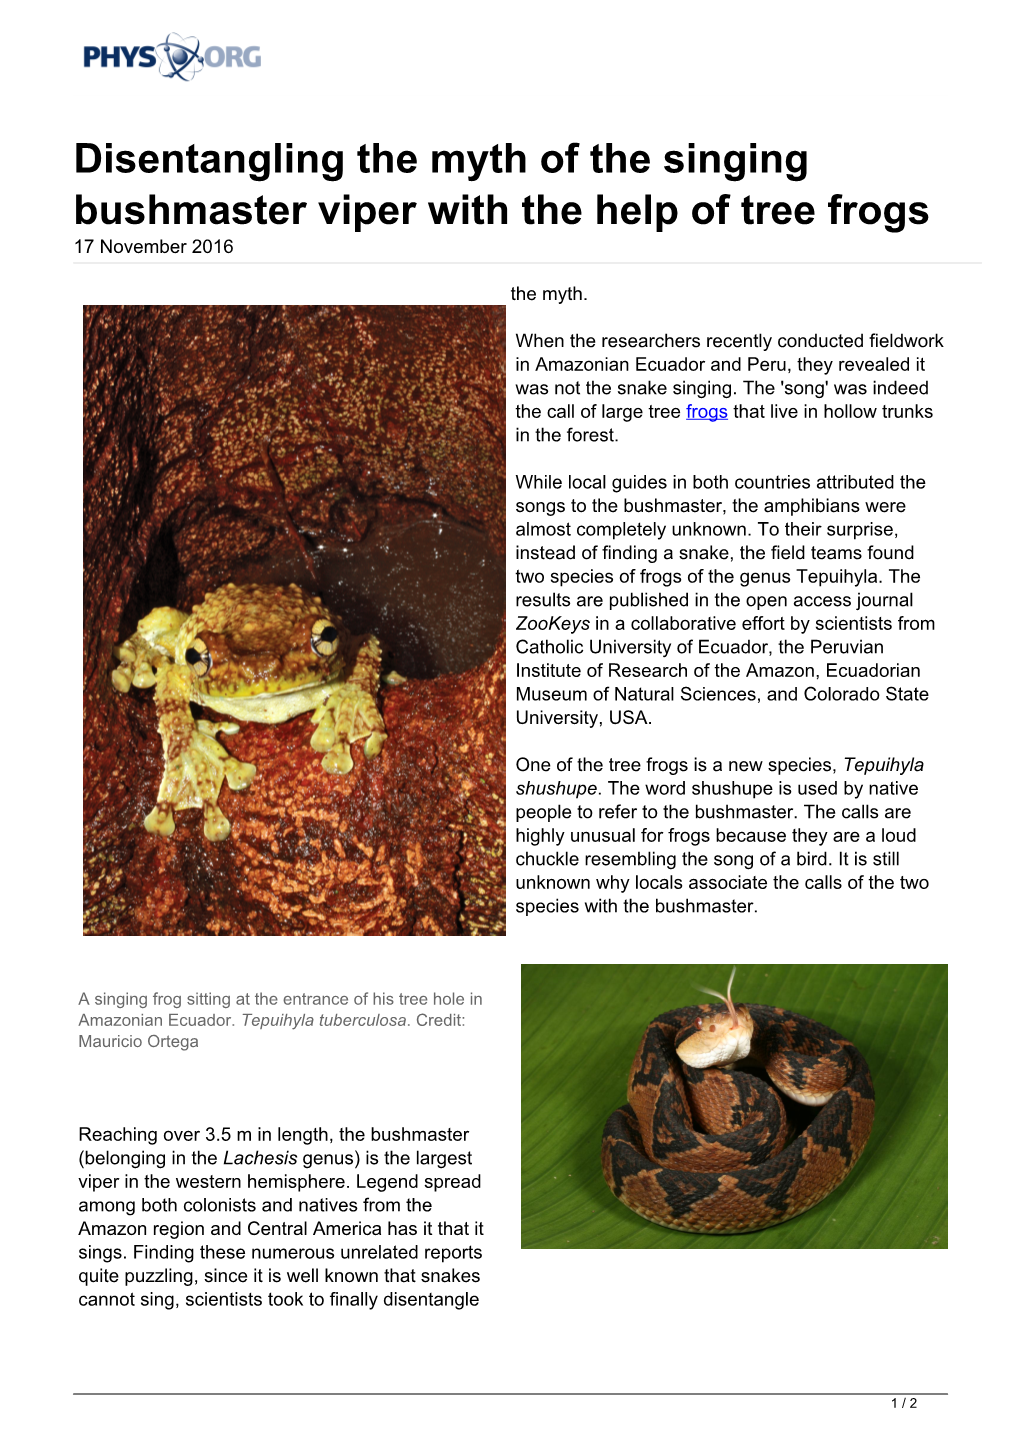 Disentangling the Myth of the Singing Bushmaster Viper with the Help of Tree Frogs 17 November 2016